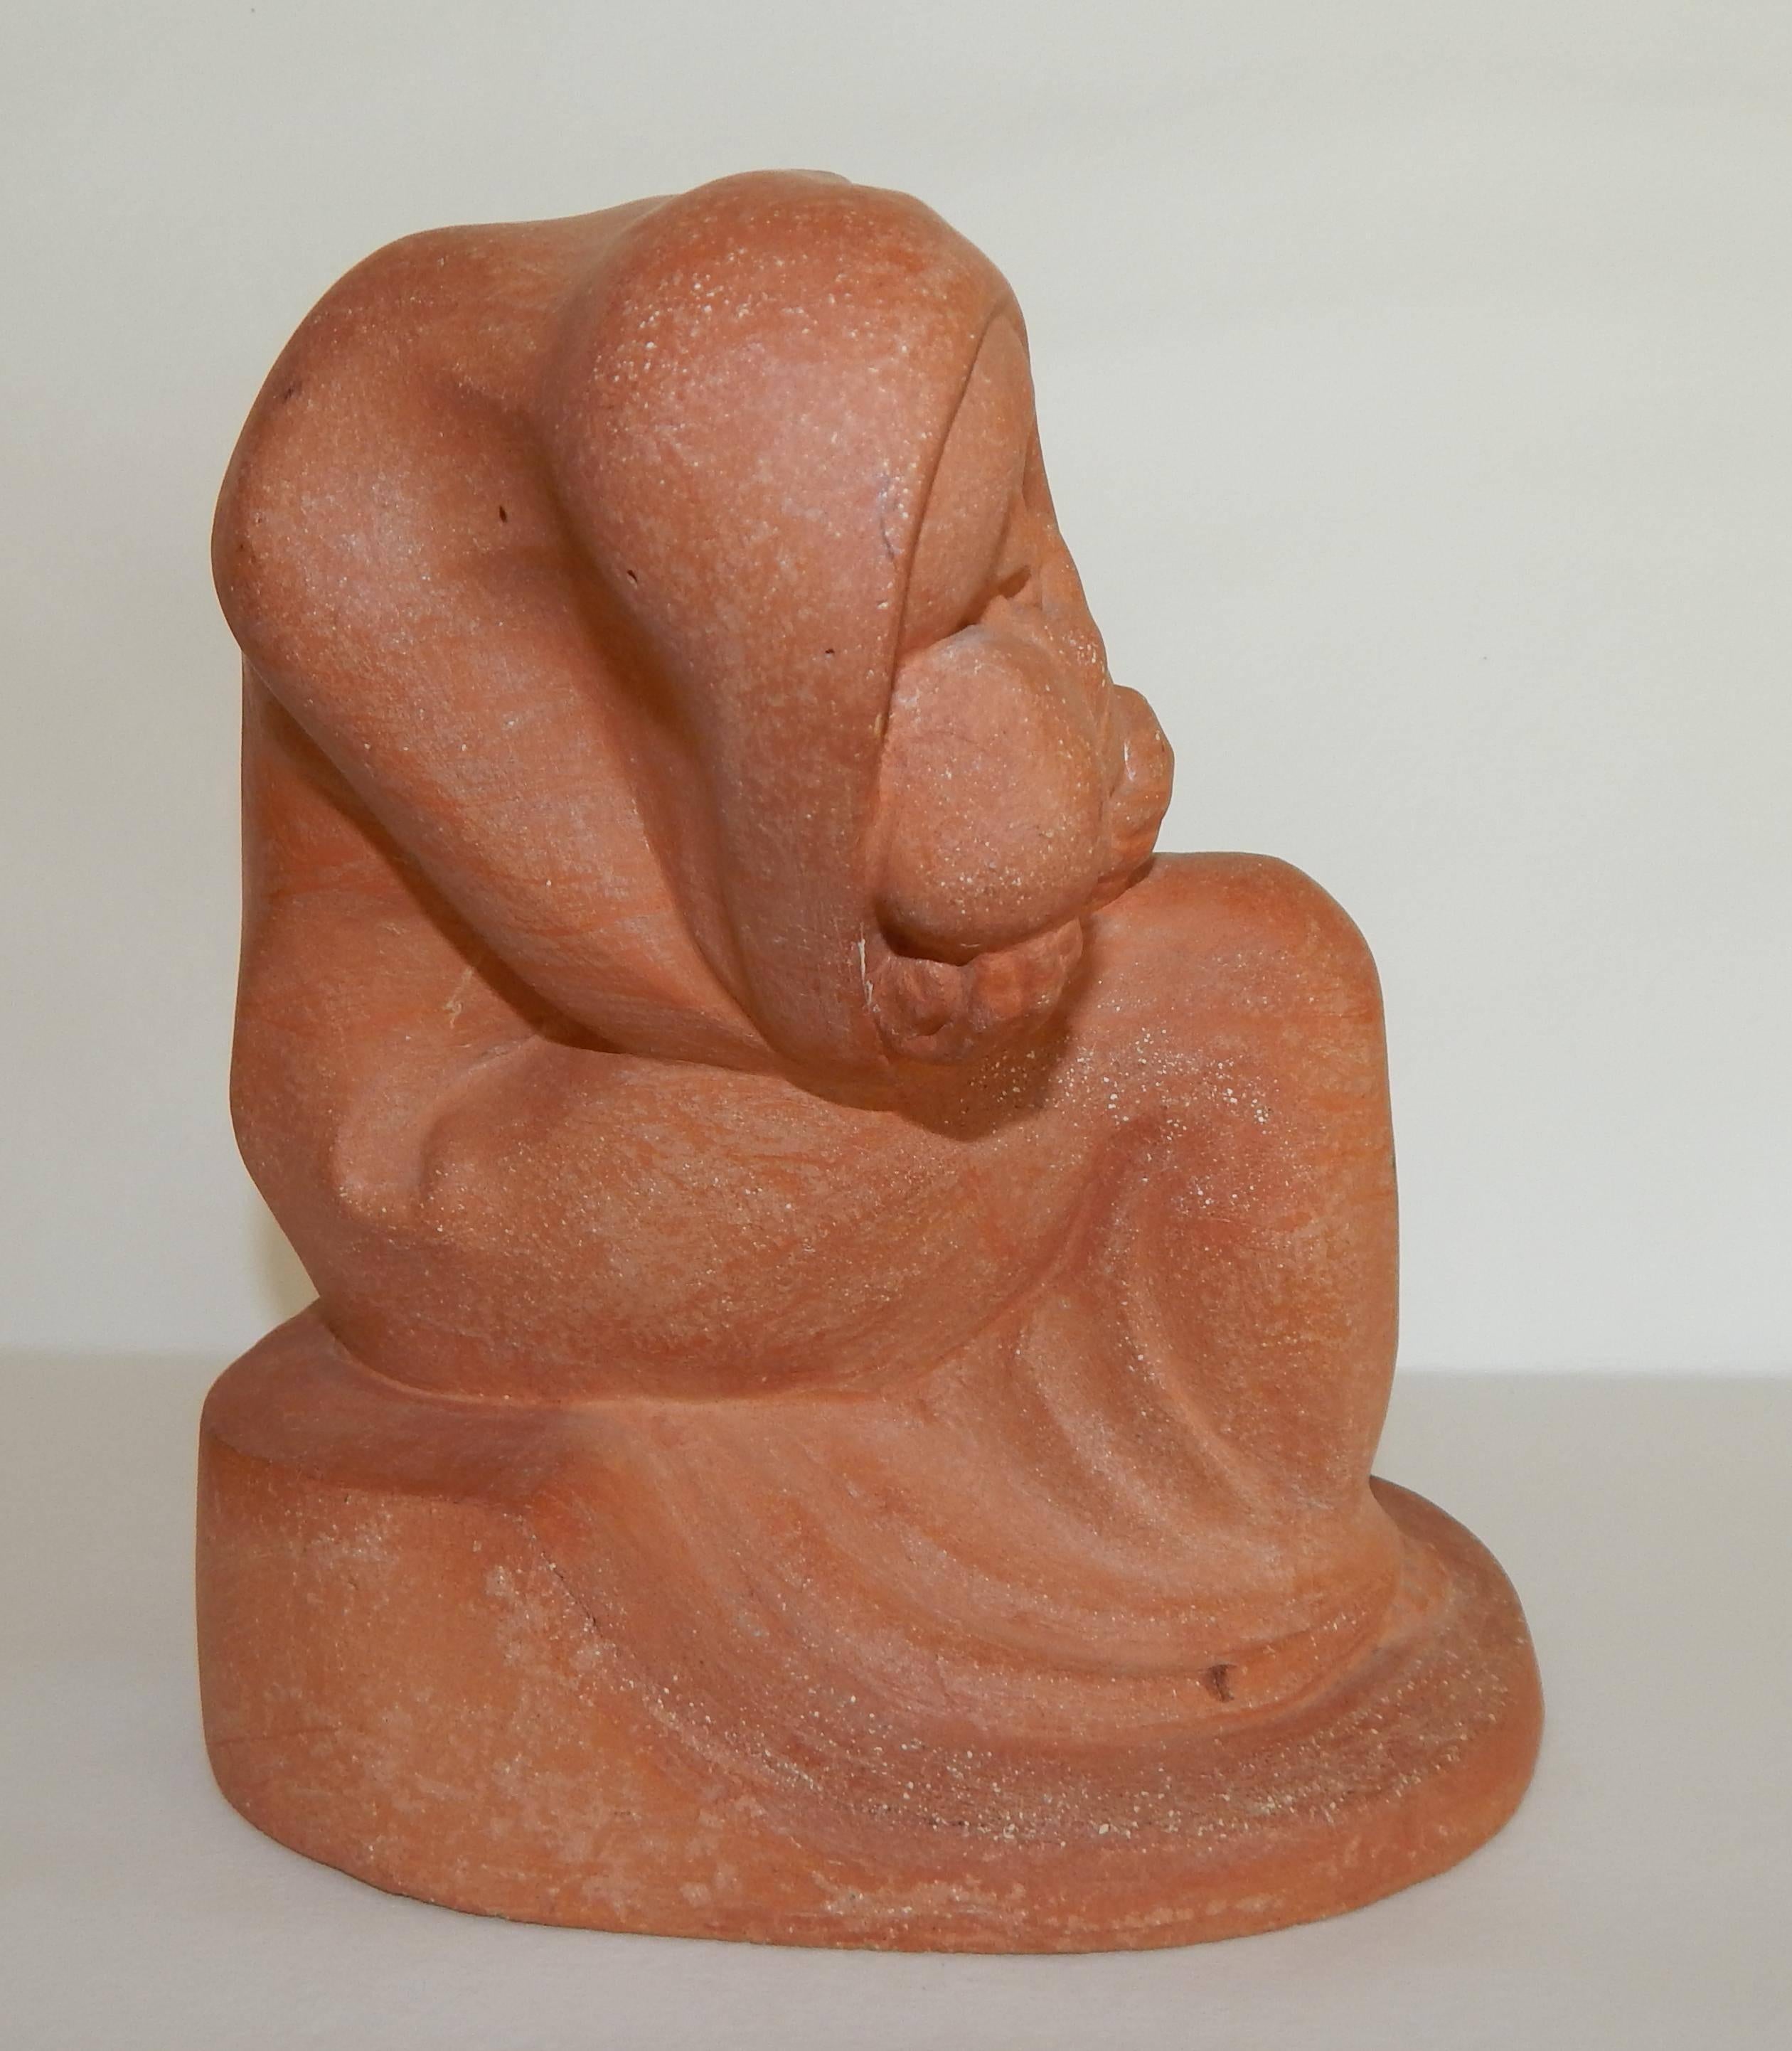 Terracotta sculpture by Bernhard Sopher (Syrian/American 1877-1949).
Clay figure of mother and child. Signed on the lower back: B. Sopher.
Measures: 7 1/2